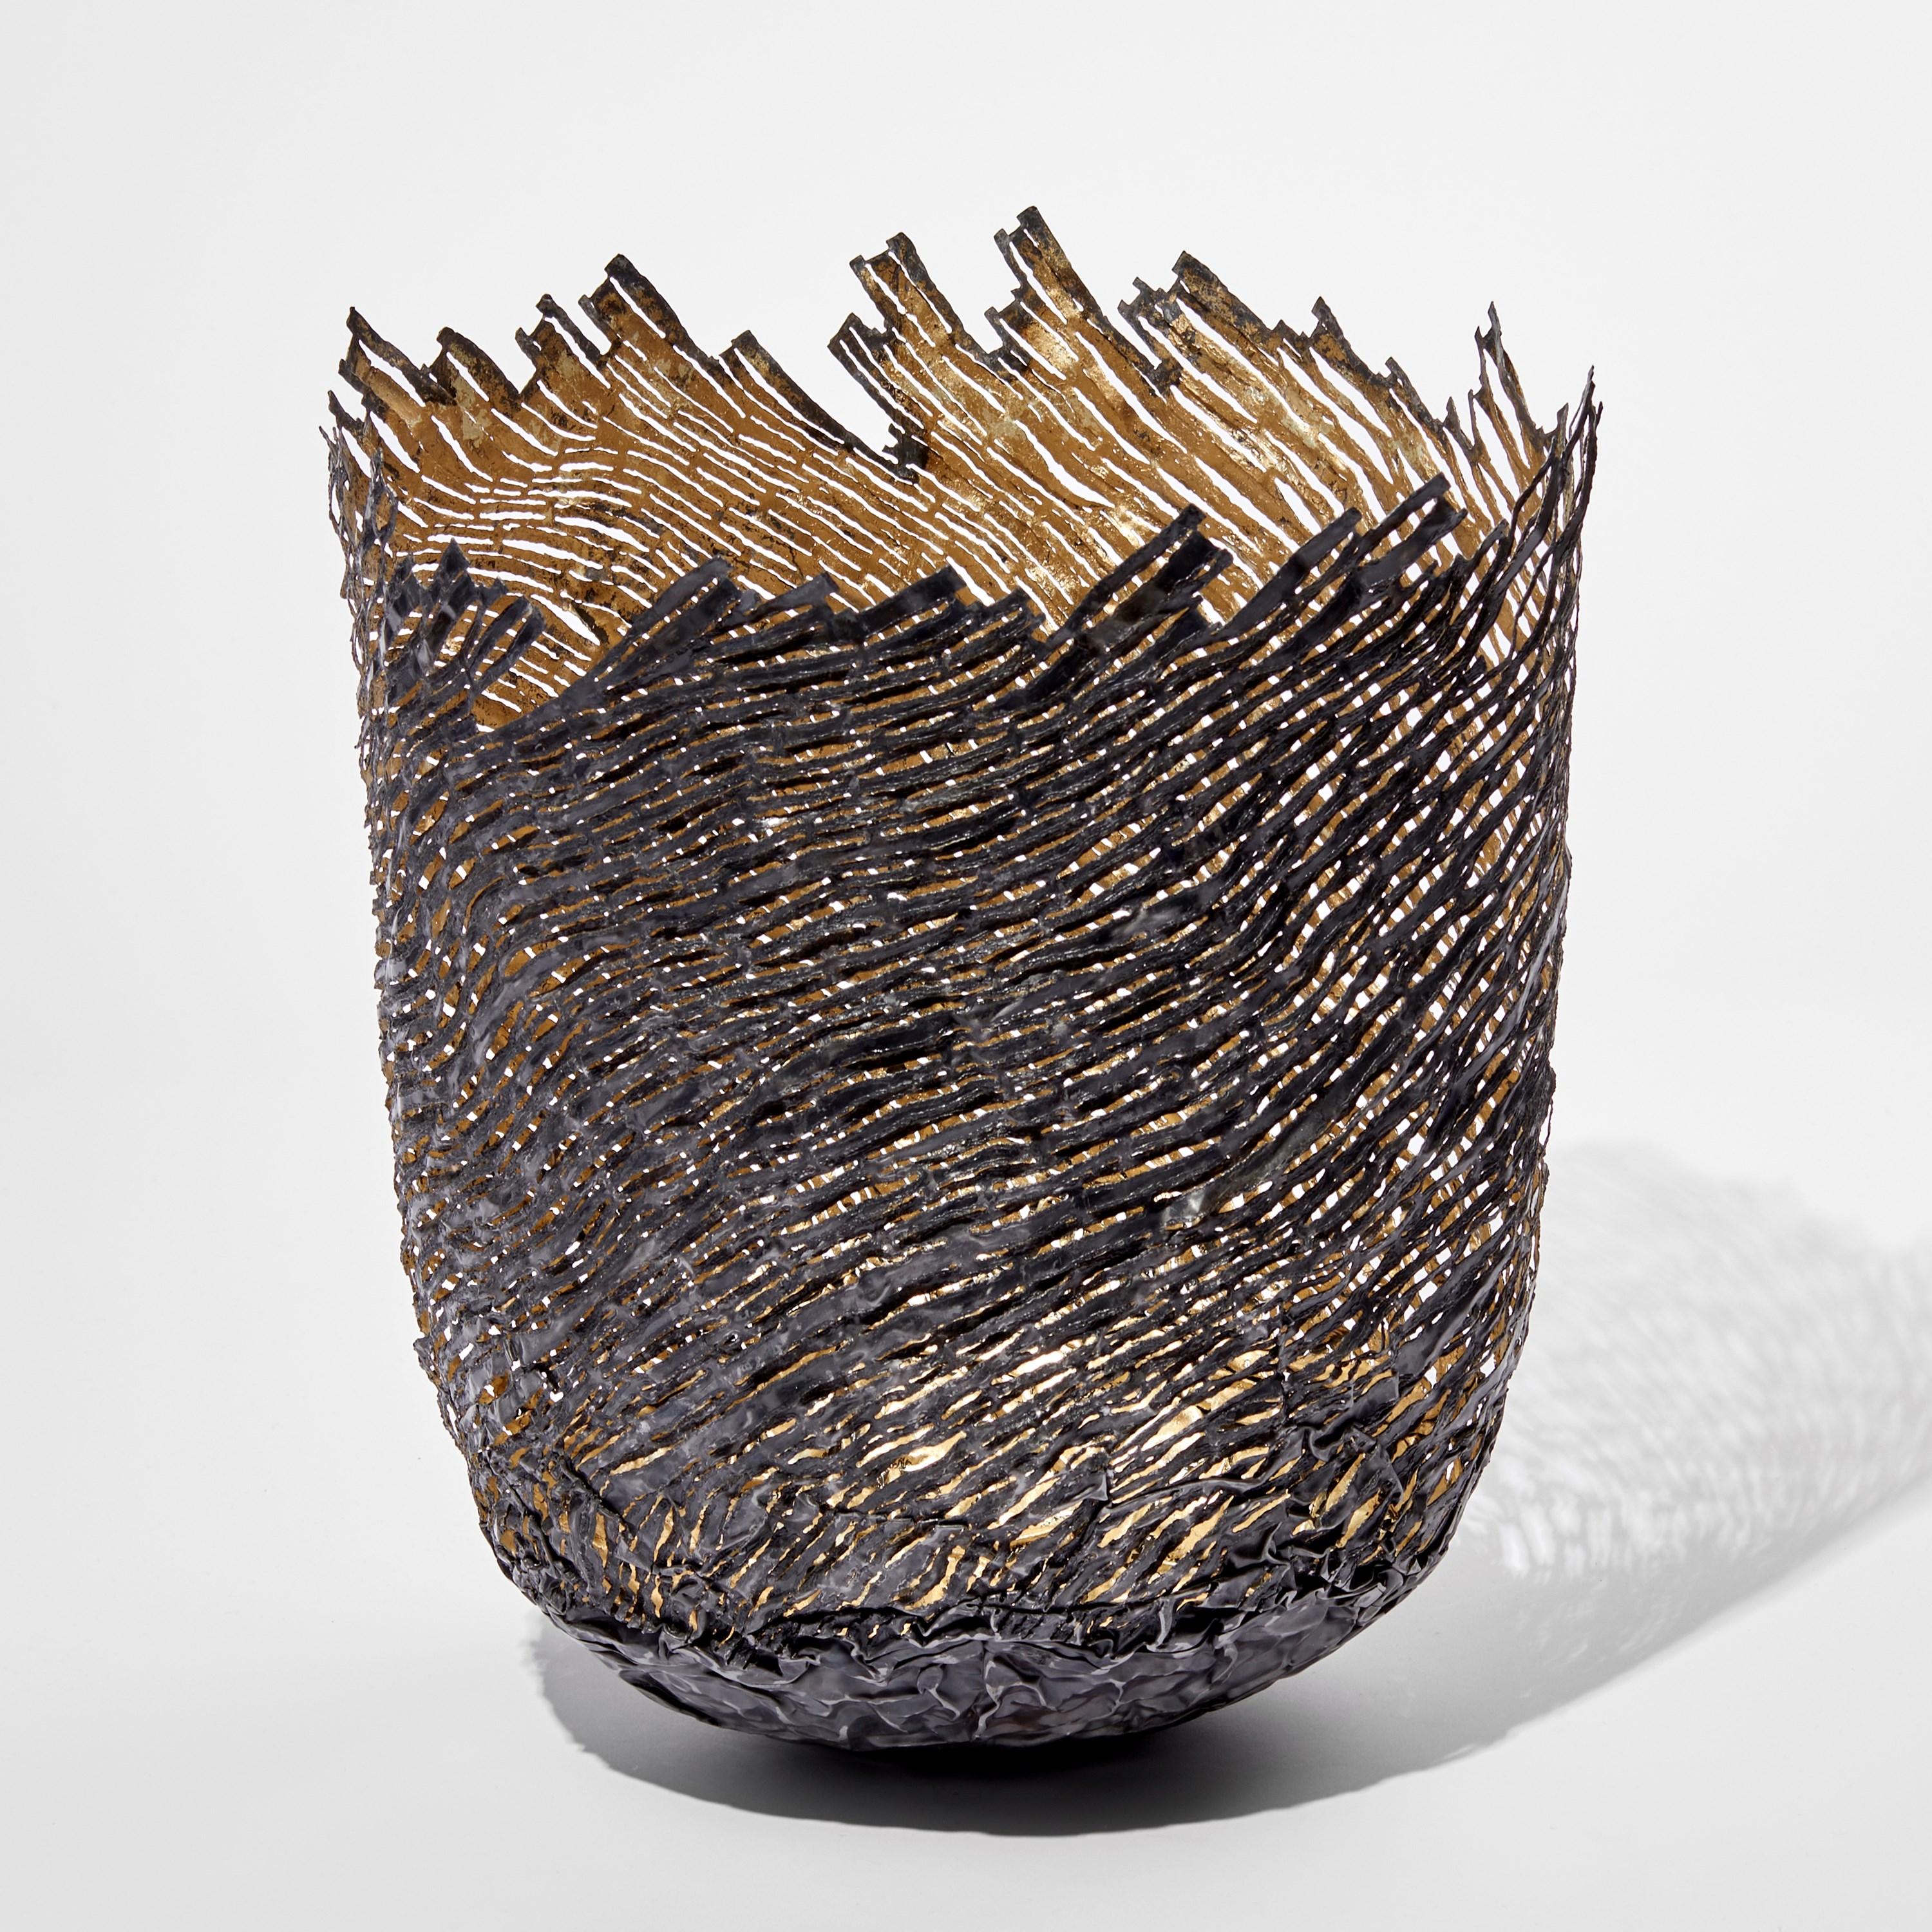 'Marloes Strata' is a unique sculptural vessel by the British artist, Claire Malet. Created from steel (re-formed steel can), 22 ct moon gold and 12 ct white gold.

Malet is an artist who works with precious, non-precious, found metals and